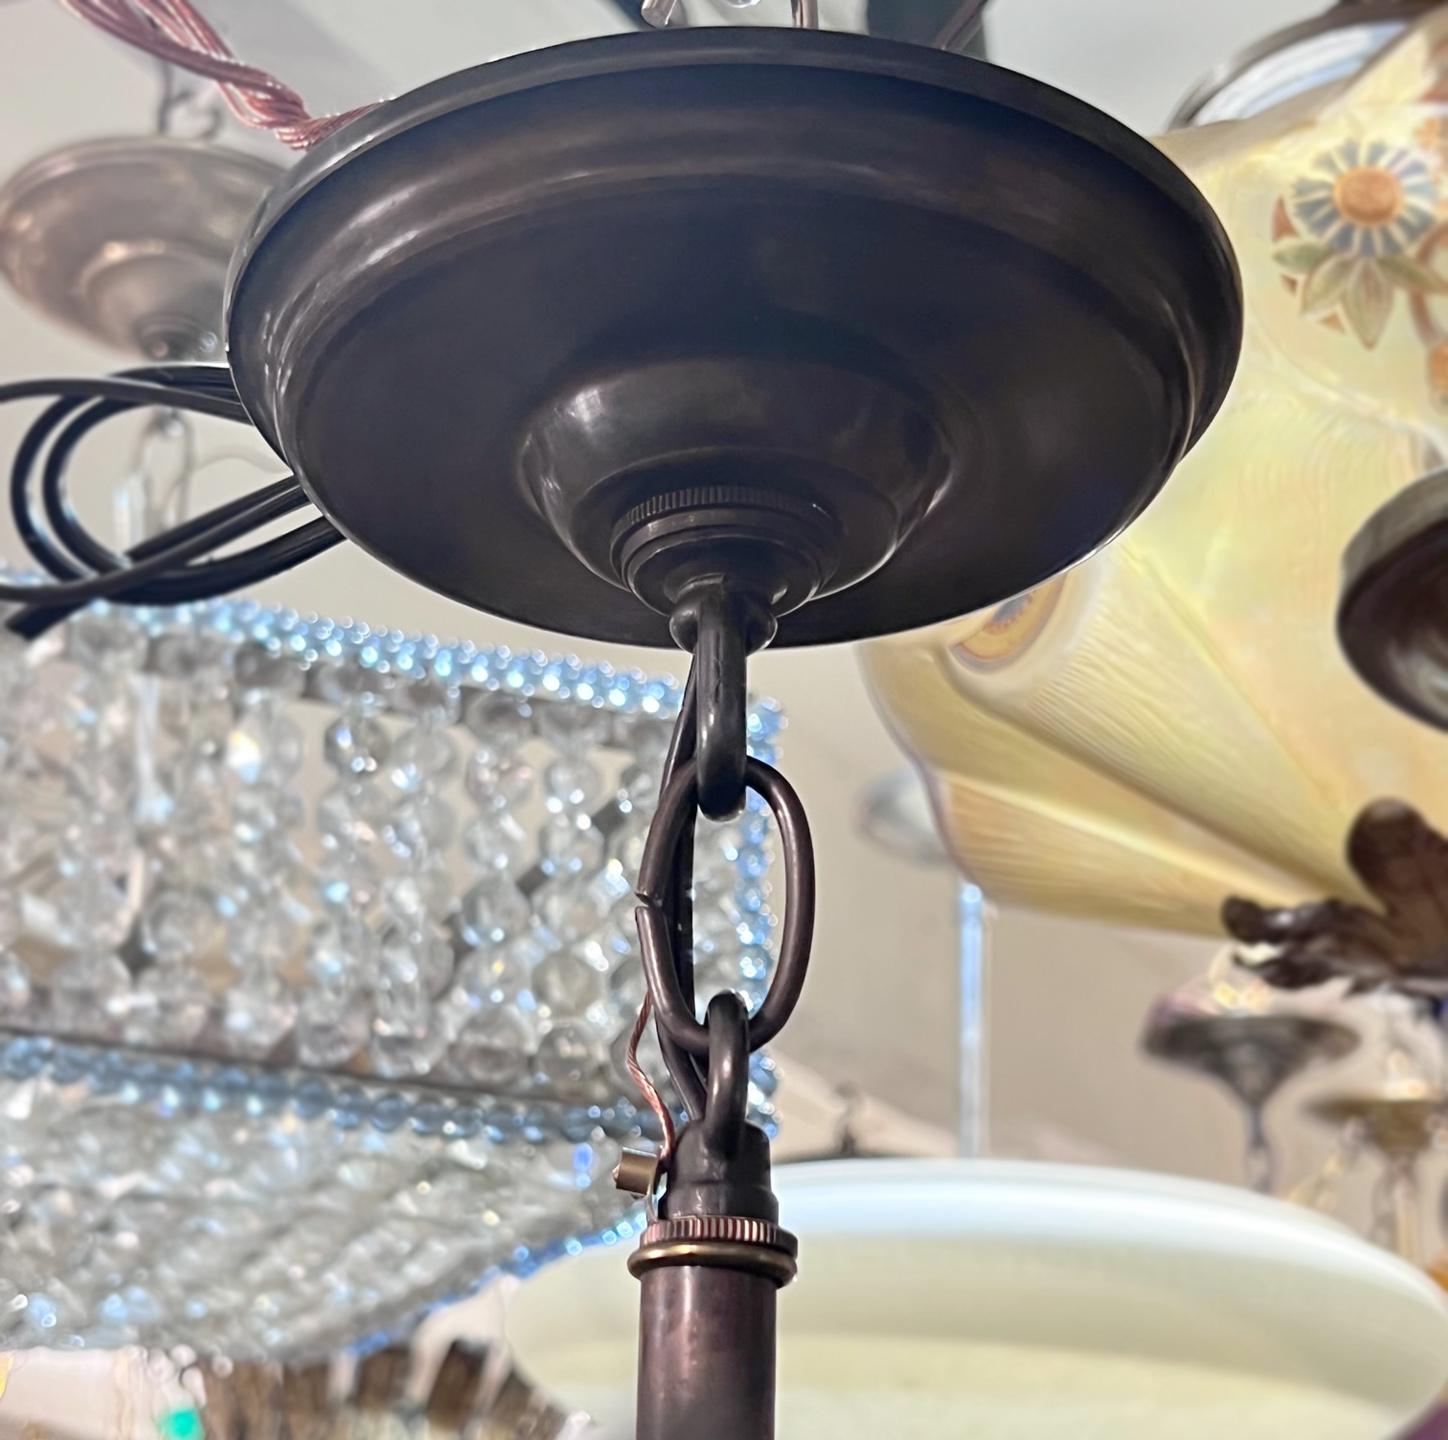 A circa 1900's Persian pierced light fixture with 4 candelabra interior lights.

Measurements:
Height: 23